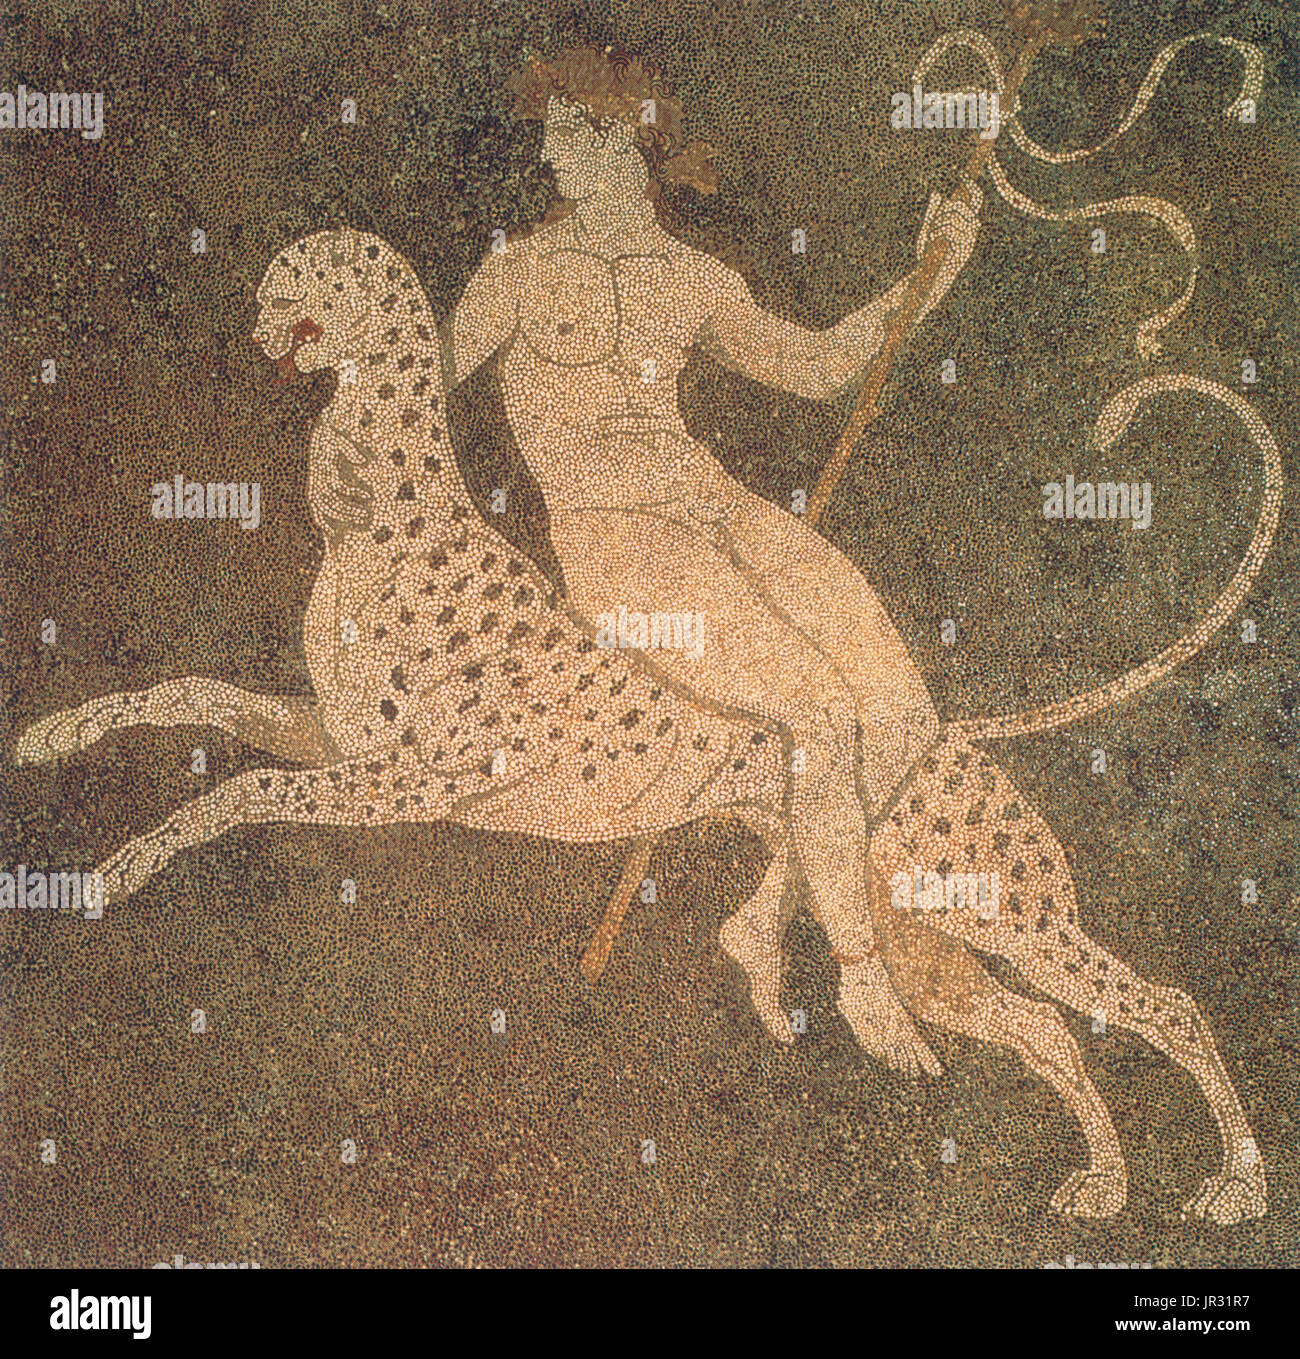 Dionysos riding a cheetah, mosaic from a wealthy home of the late 4th century BC, the 'House of Dionysos' at Pella, in Pella, the capital of the Macedonian Kingdom. Dionysus is the god of the grape harvest, winemaking and wine, of ritual madness, fertility, theater and religious ecstasy in ancient Greek religion and myth. Wine played an important role in Greek culture, and the cult of Dionysus was the main religious focus for its unrestrained consumption. He is a major, popular figure of Greek mythology and religion, becoming increasingly important over time, and included in some lists of the  Stock Photo